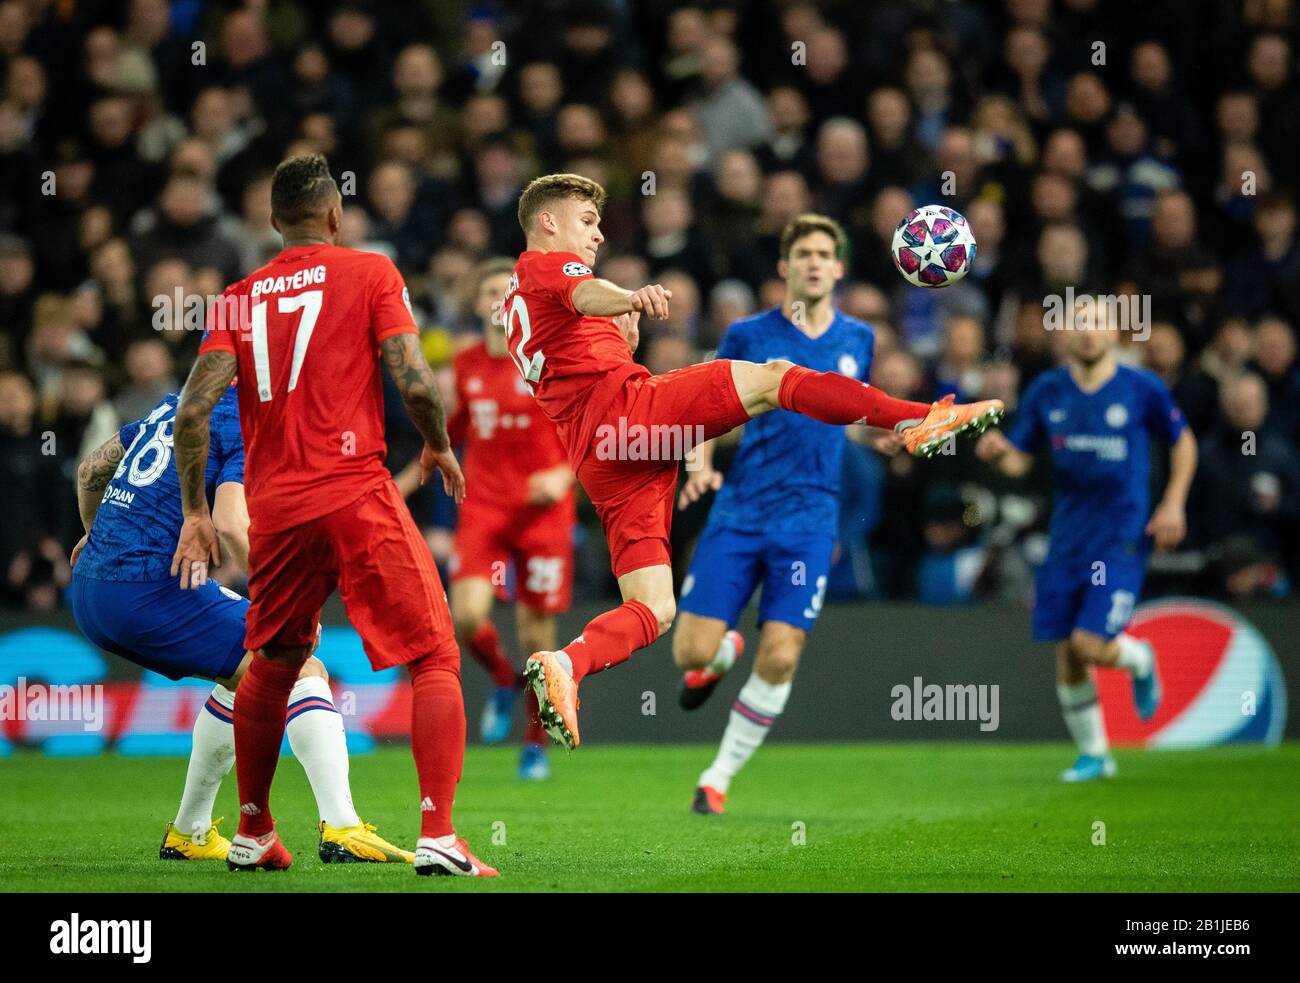 London, 25.02.2020 Joshua Kimmich (FCB) Chelsea London - FC Bayern München  DFL regulations prohibit any use of photographs as image sequences and/or Stock Photo